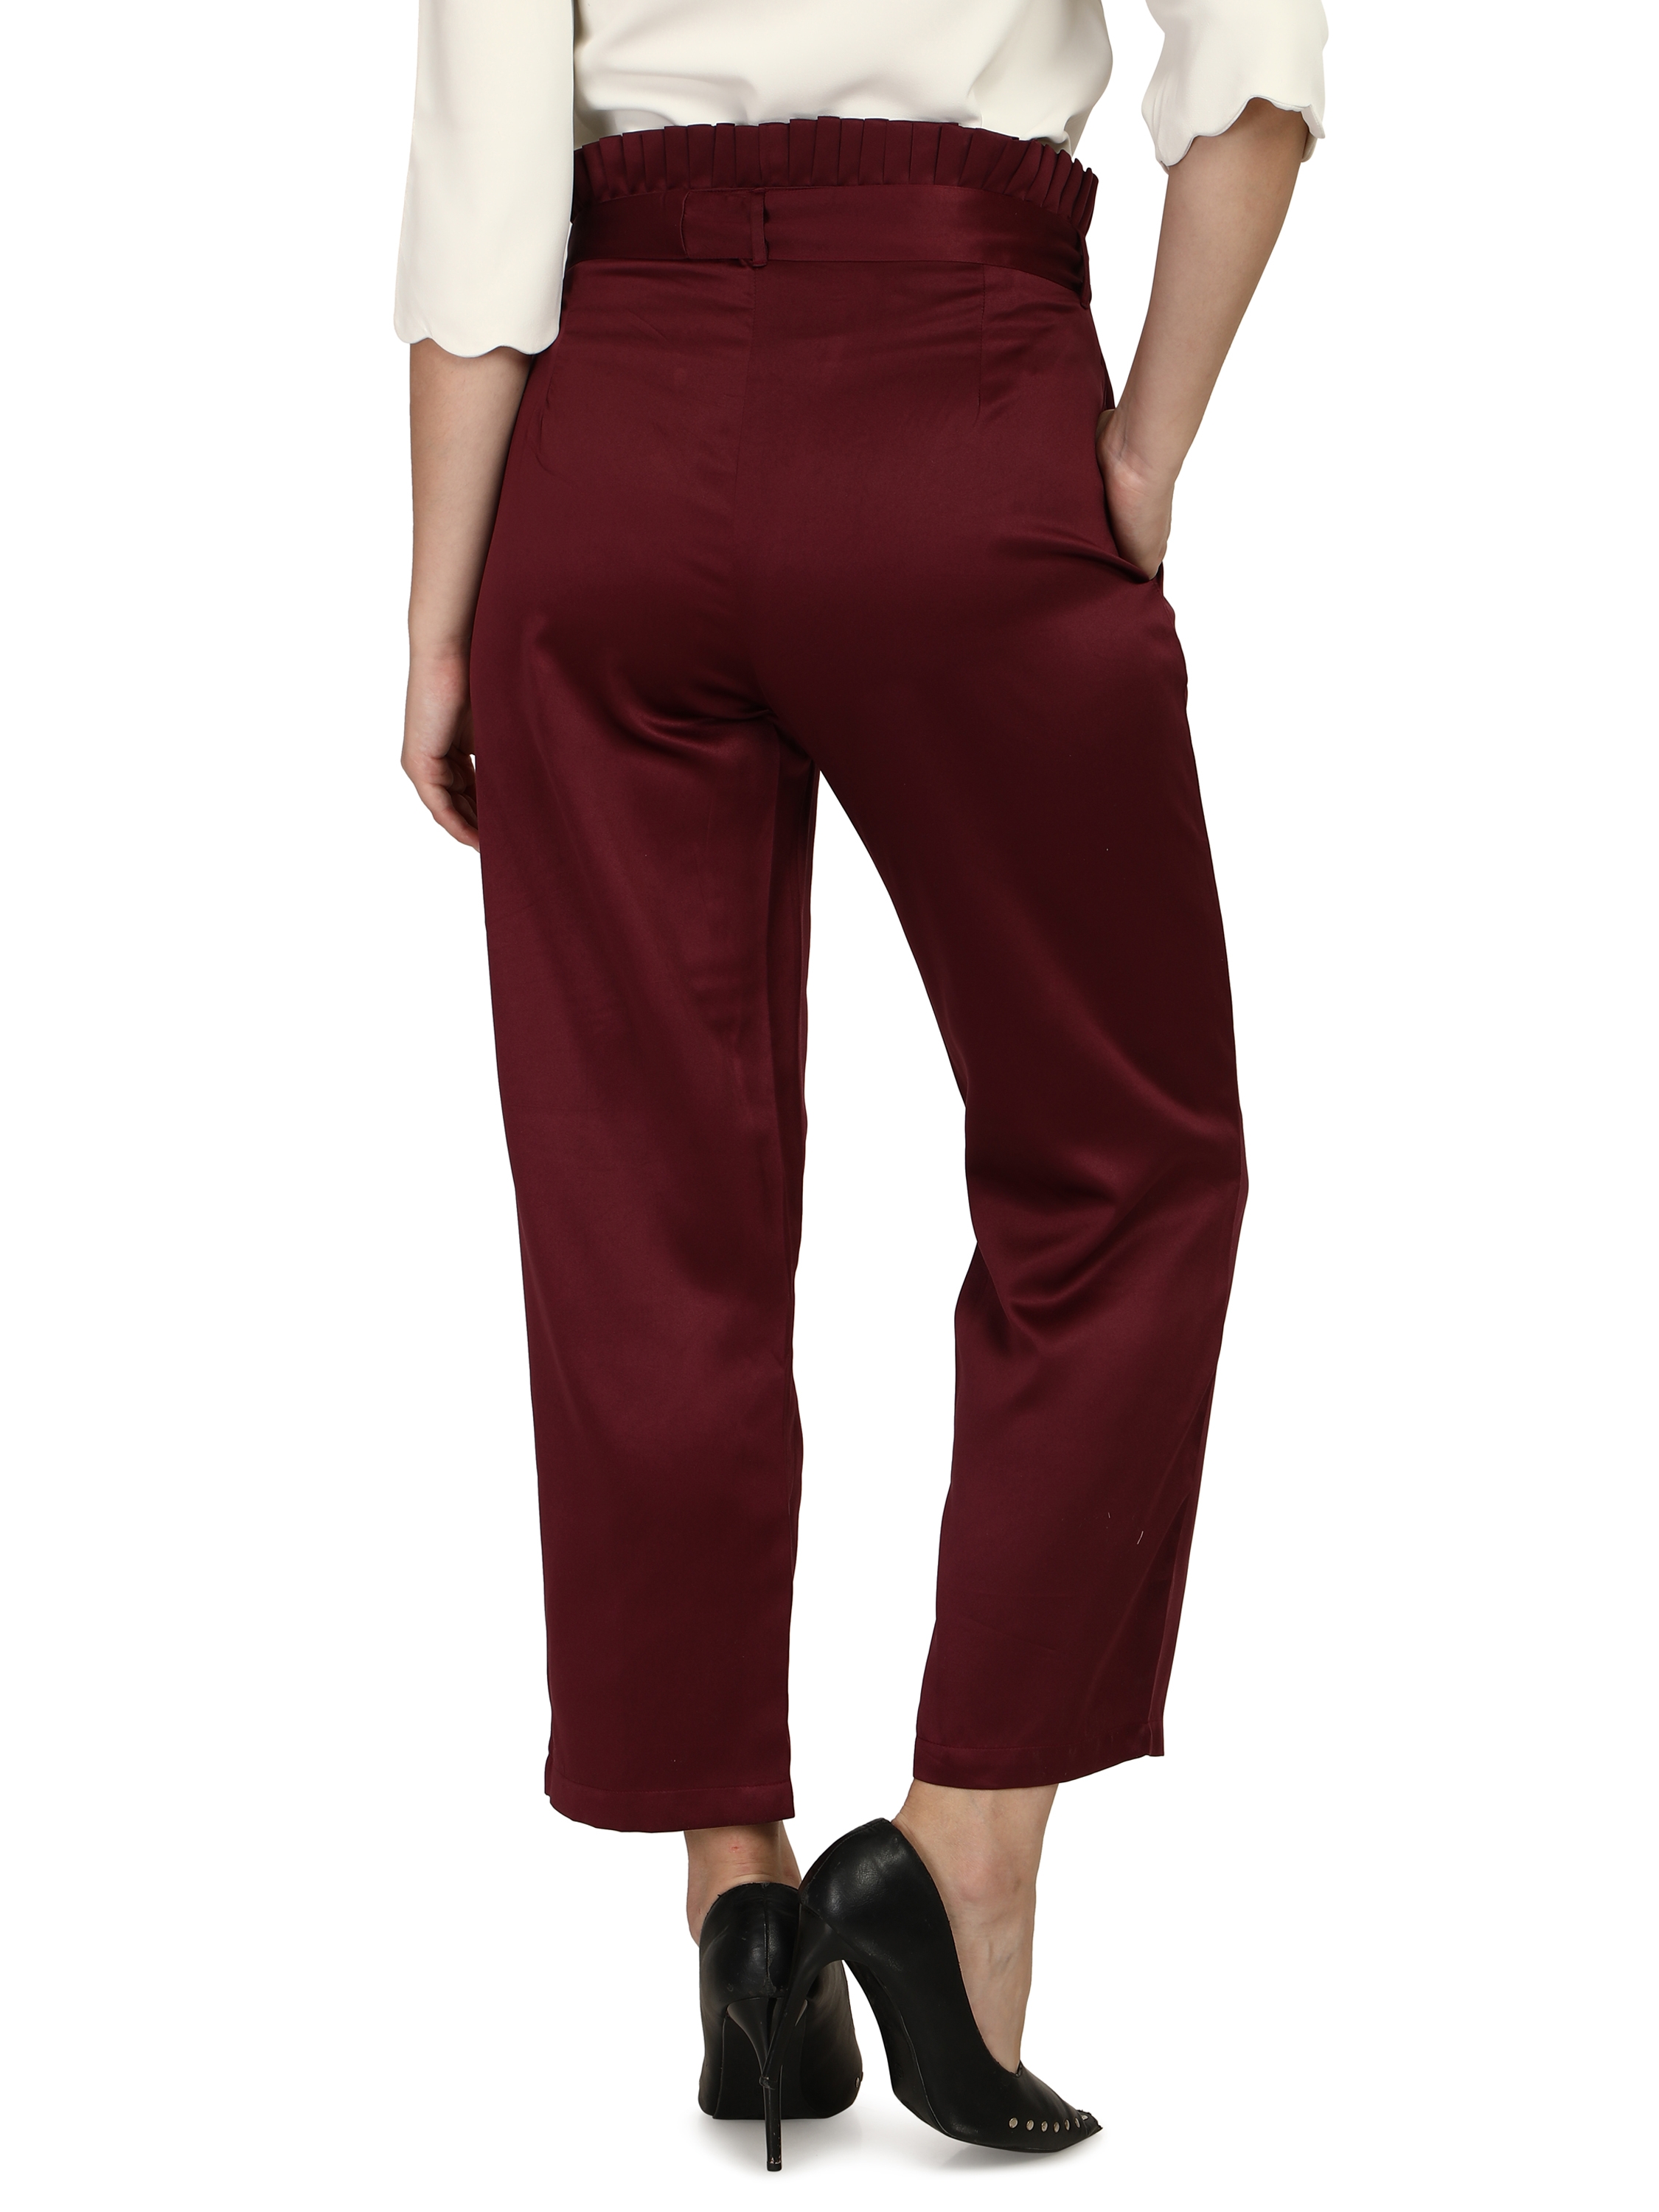 High Waisted Wine Red Capris For Women Casual Belt Formal Trousers For  Women With Zoravicky Design Perfect For Office And Formal Occasions  LJ200820 From Luo04, $20.04 | DHgate.Com